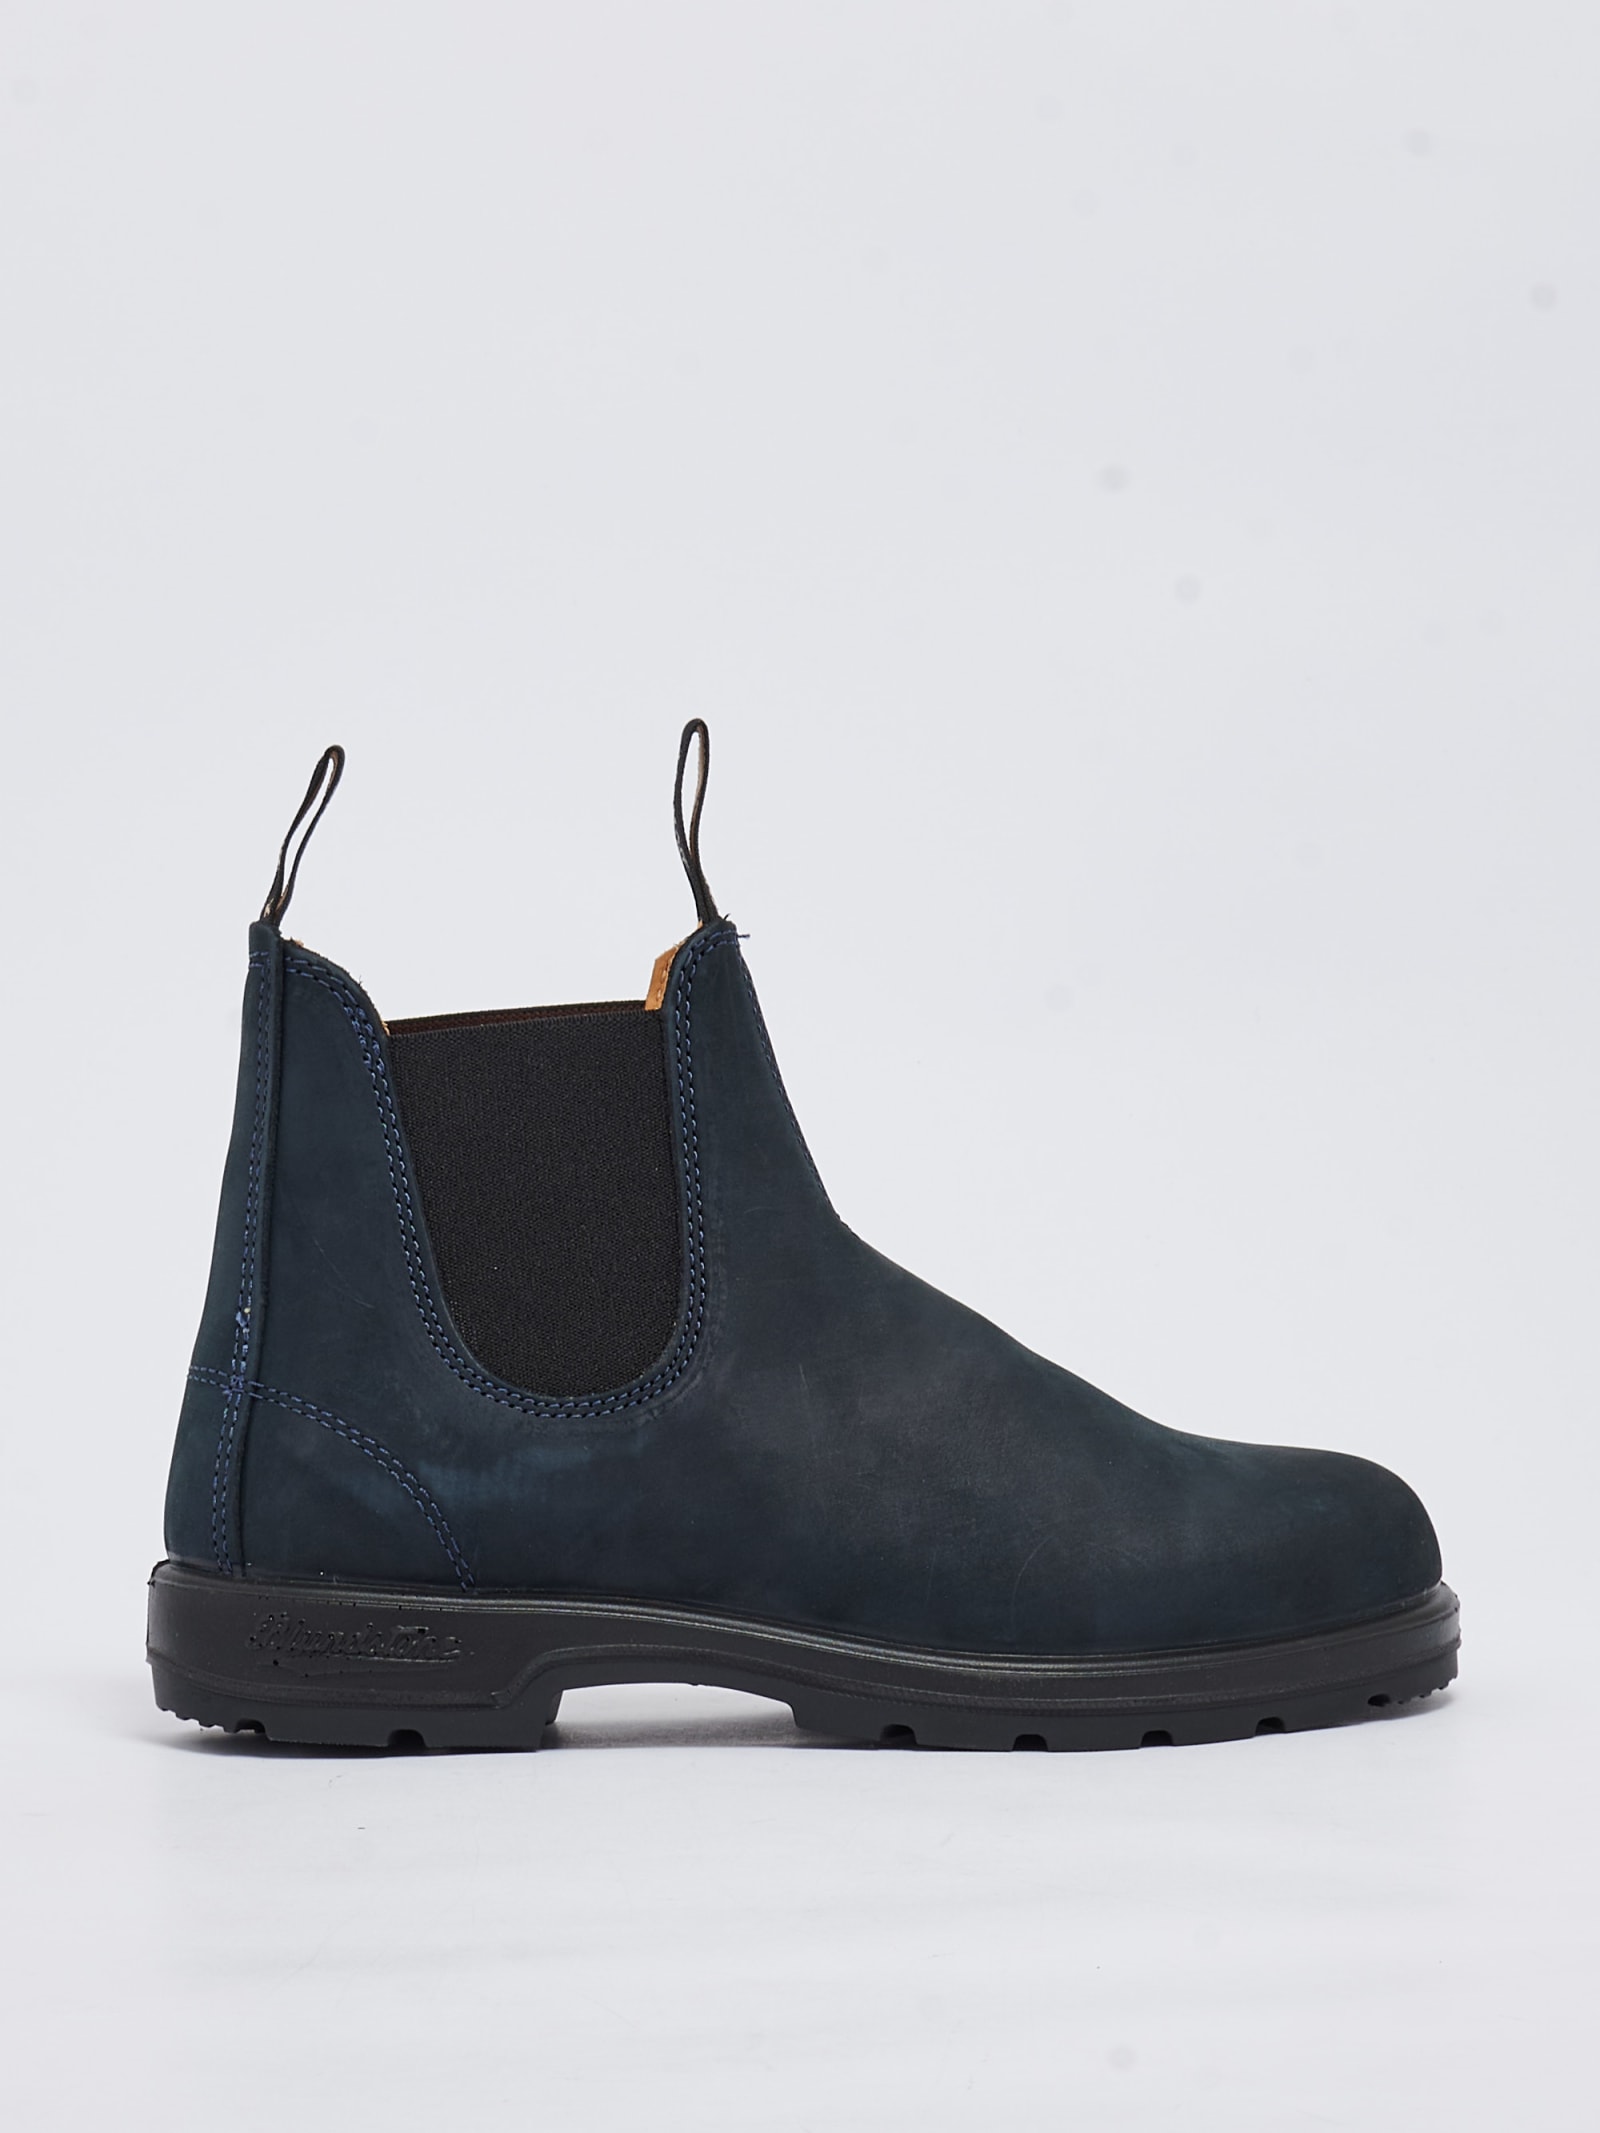 BLUNDSTONE 1940 NUBUCK BLUNDSTONE COLLECTION BOOTS